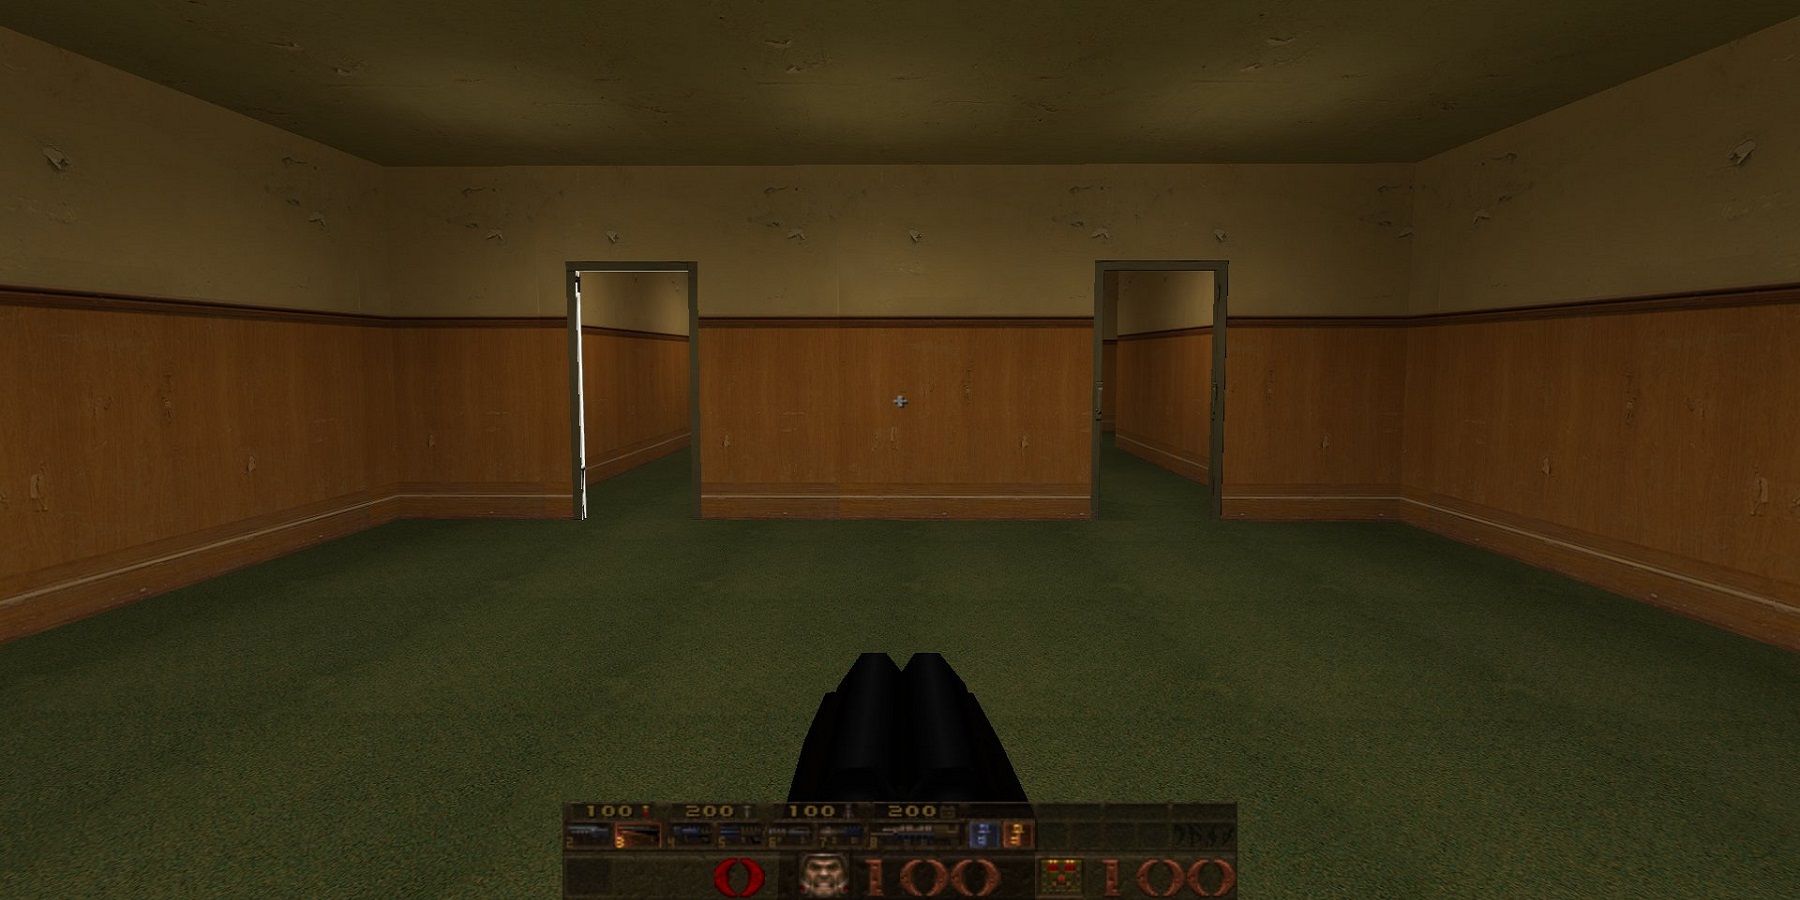 Image from Quake showing the two corridors in The Stanley Parable.